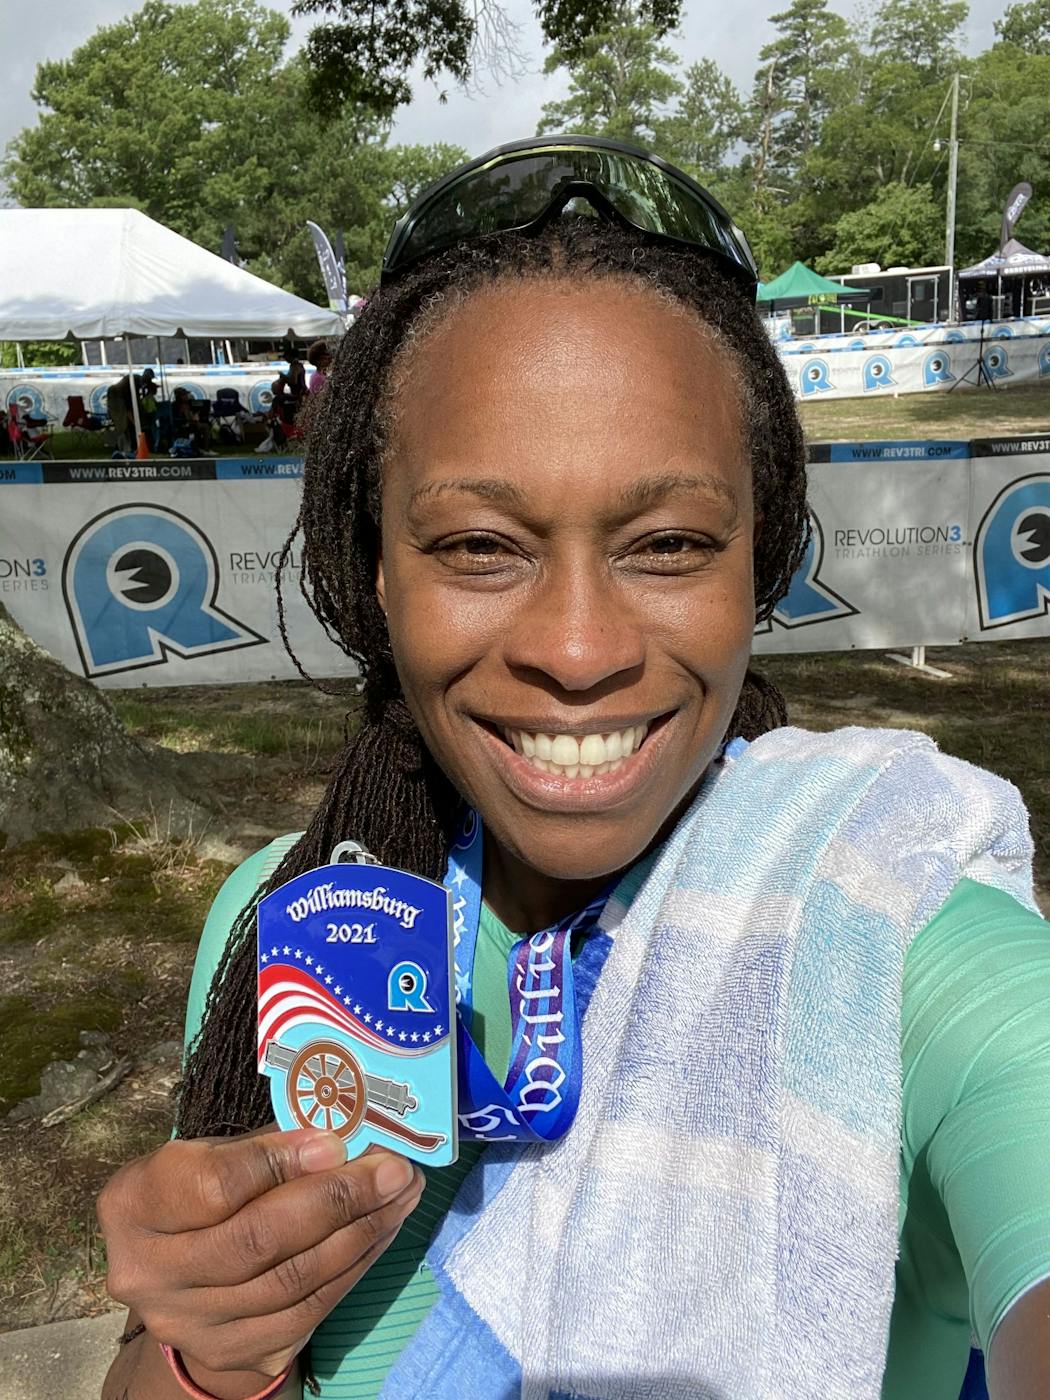 Botchwey learned to swim as an adult by training for her first triathlon and has been hooked on the competitions ever since.